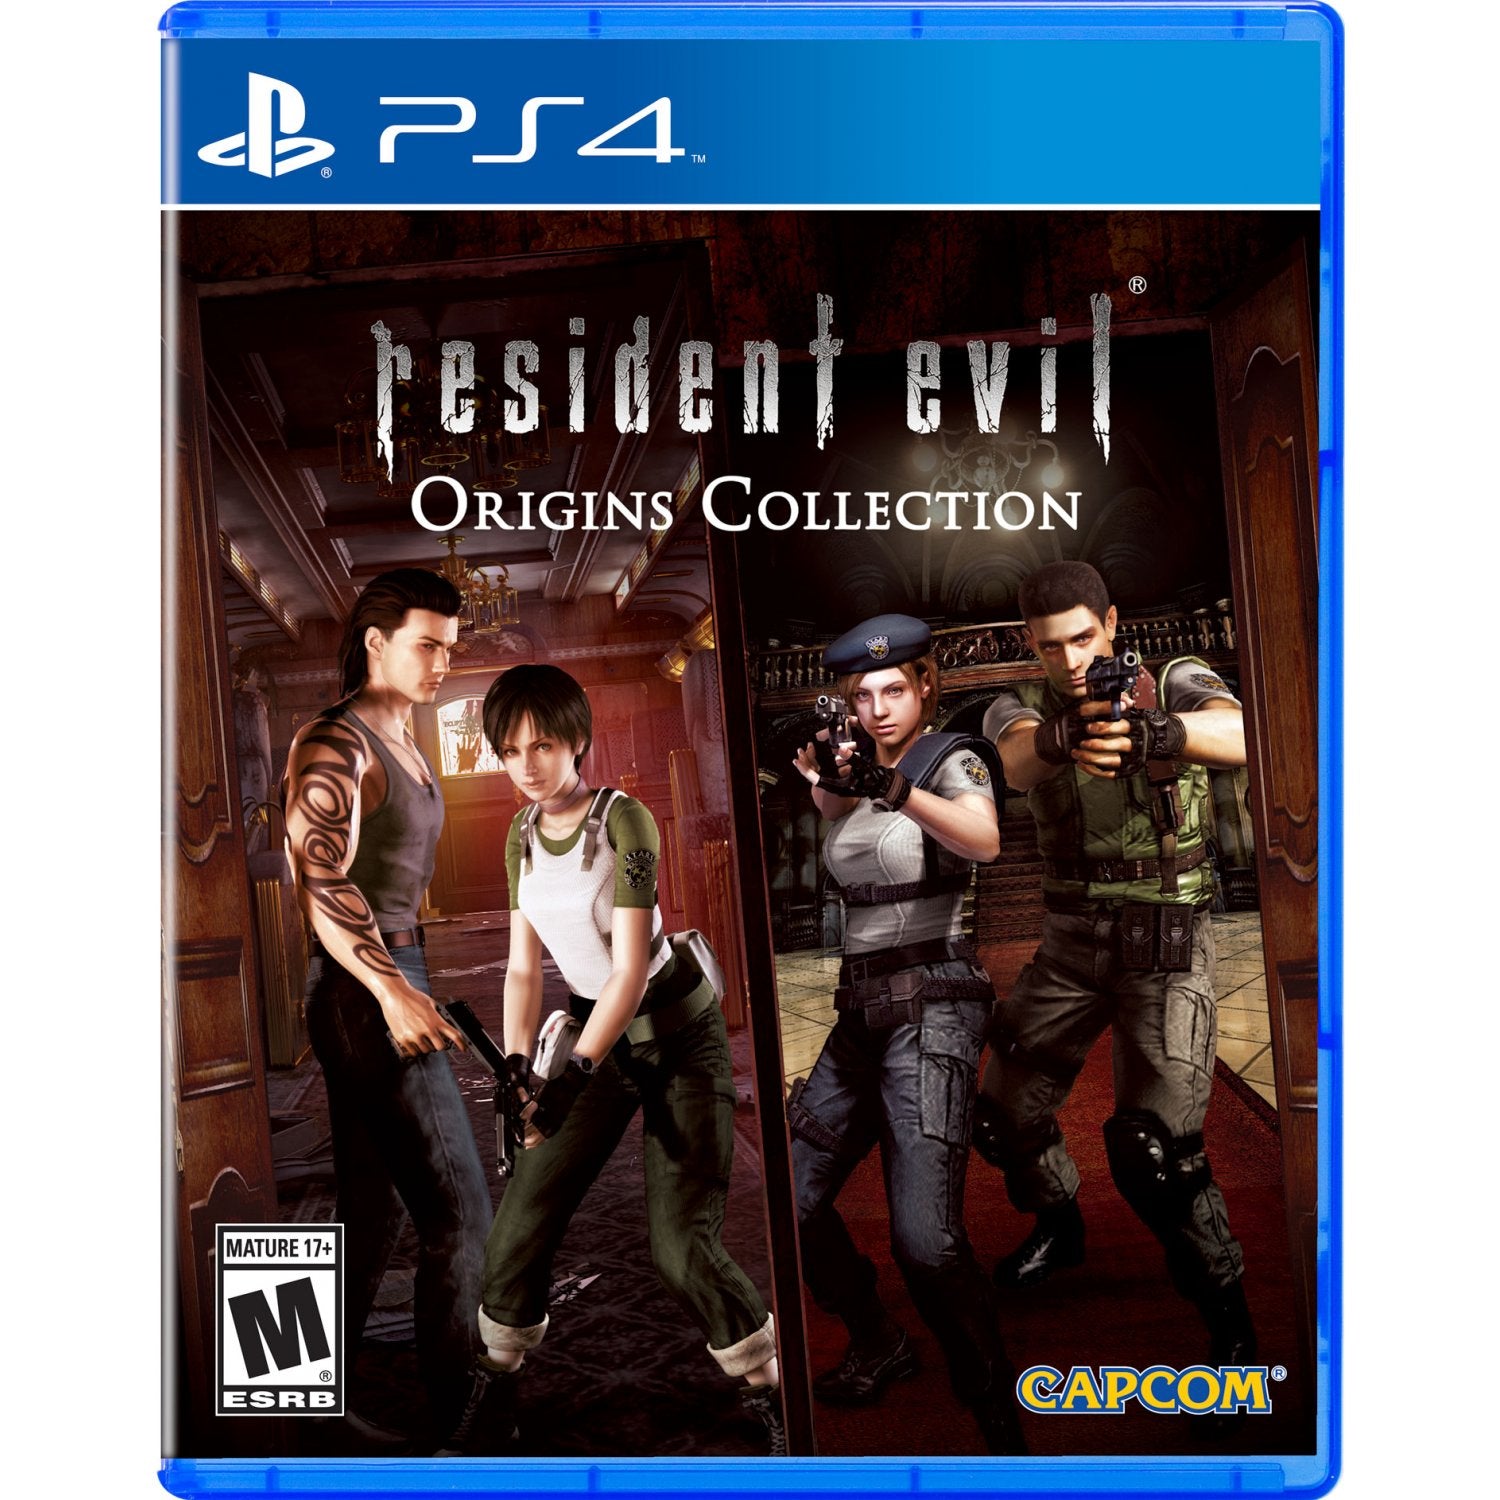 PS4 Resident Evil Origins Collection (NC16)